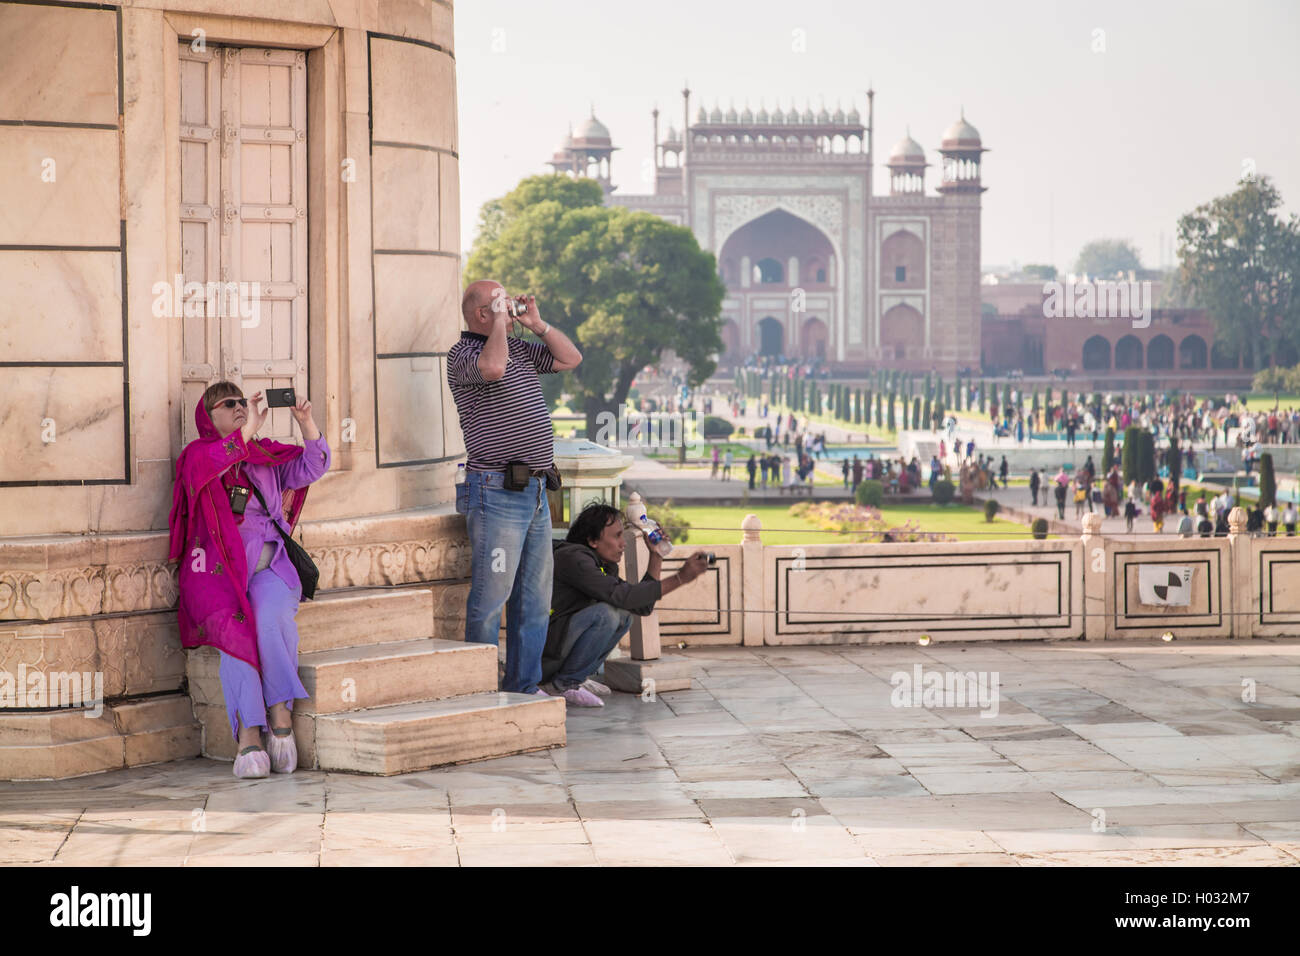 AGRA, INDIA - 28 FEBRUARY 2015: Visitors photographing Taj Mahal with Great Gate in background. Stock Photo